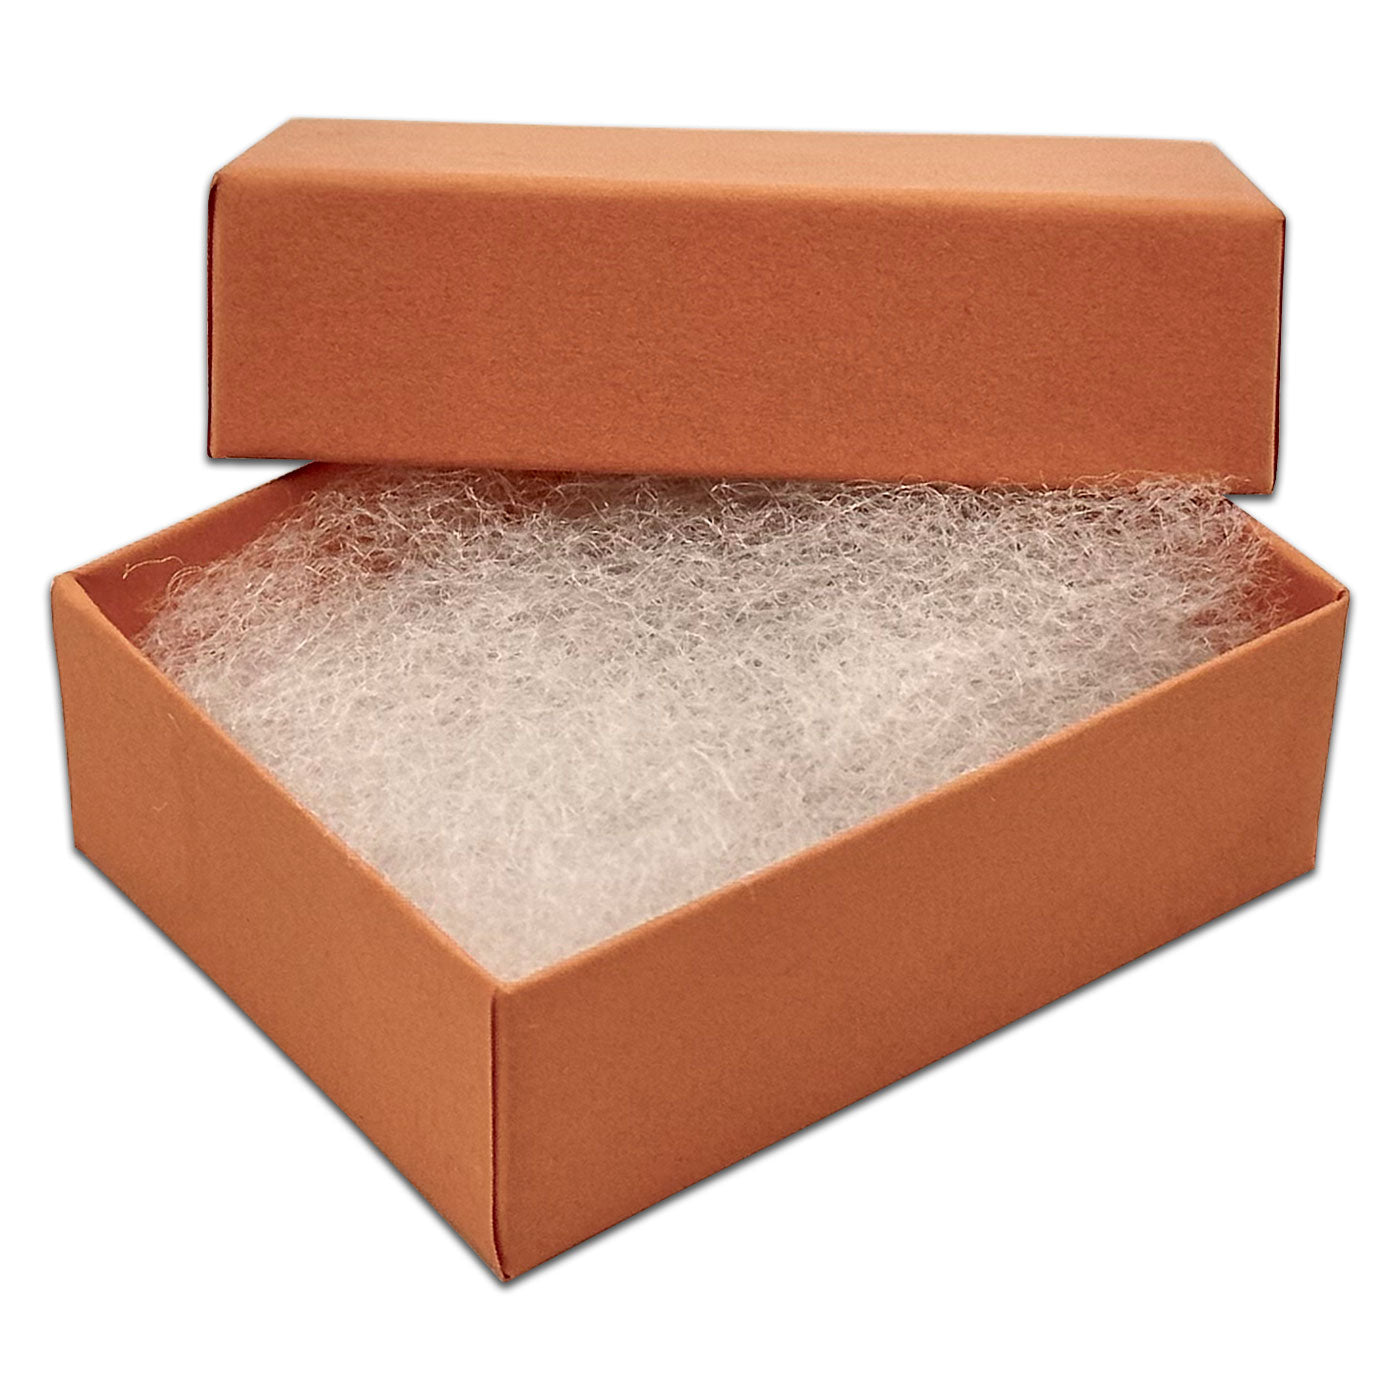 2 1/8" x 1 5/8" x 3/4" Coral Cotton Filled Paper Box